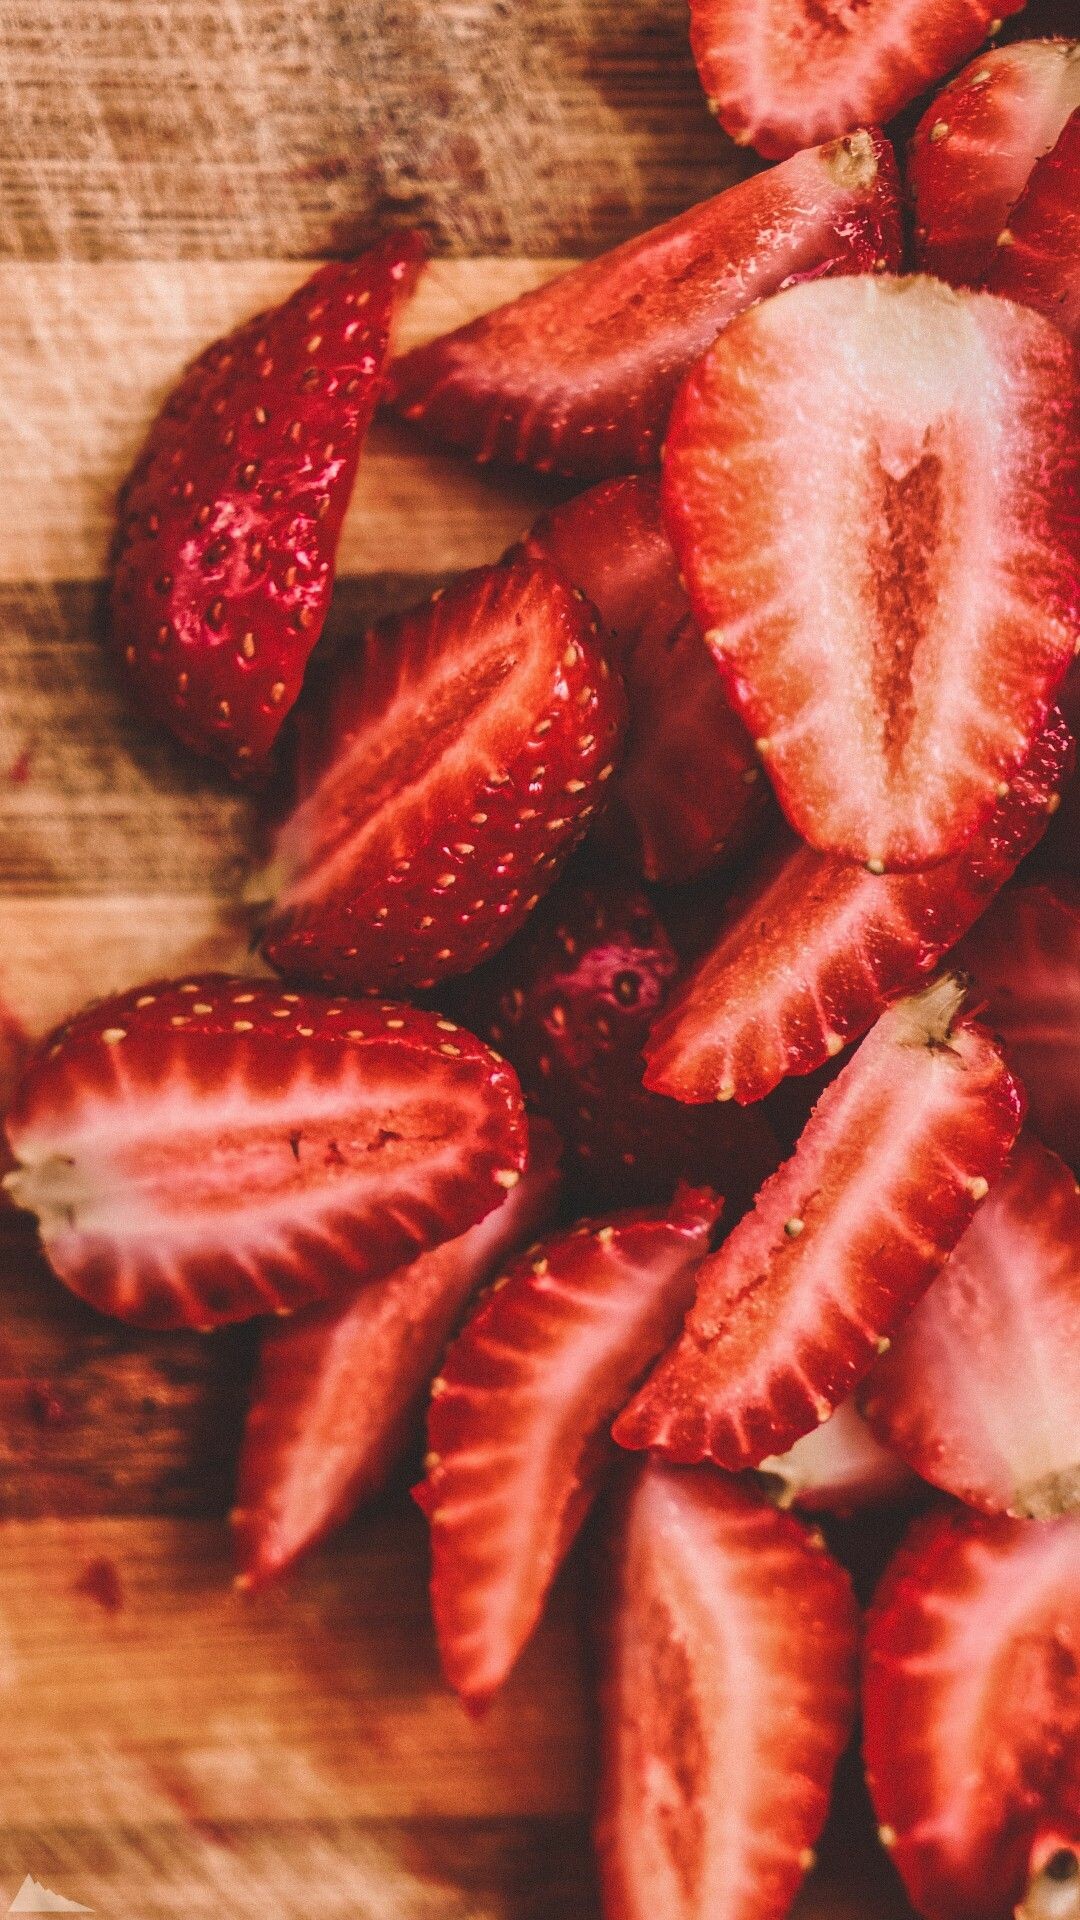 Fruit: Strawberry, Consists of many tiny individual fruits embedded in a fleshy receptacle, Food. 1080x1920 Full HD Wallpaper.